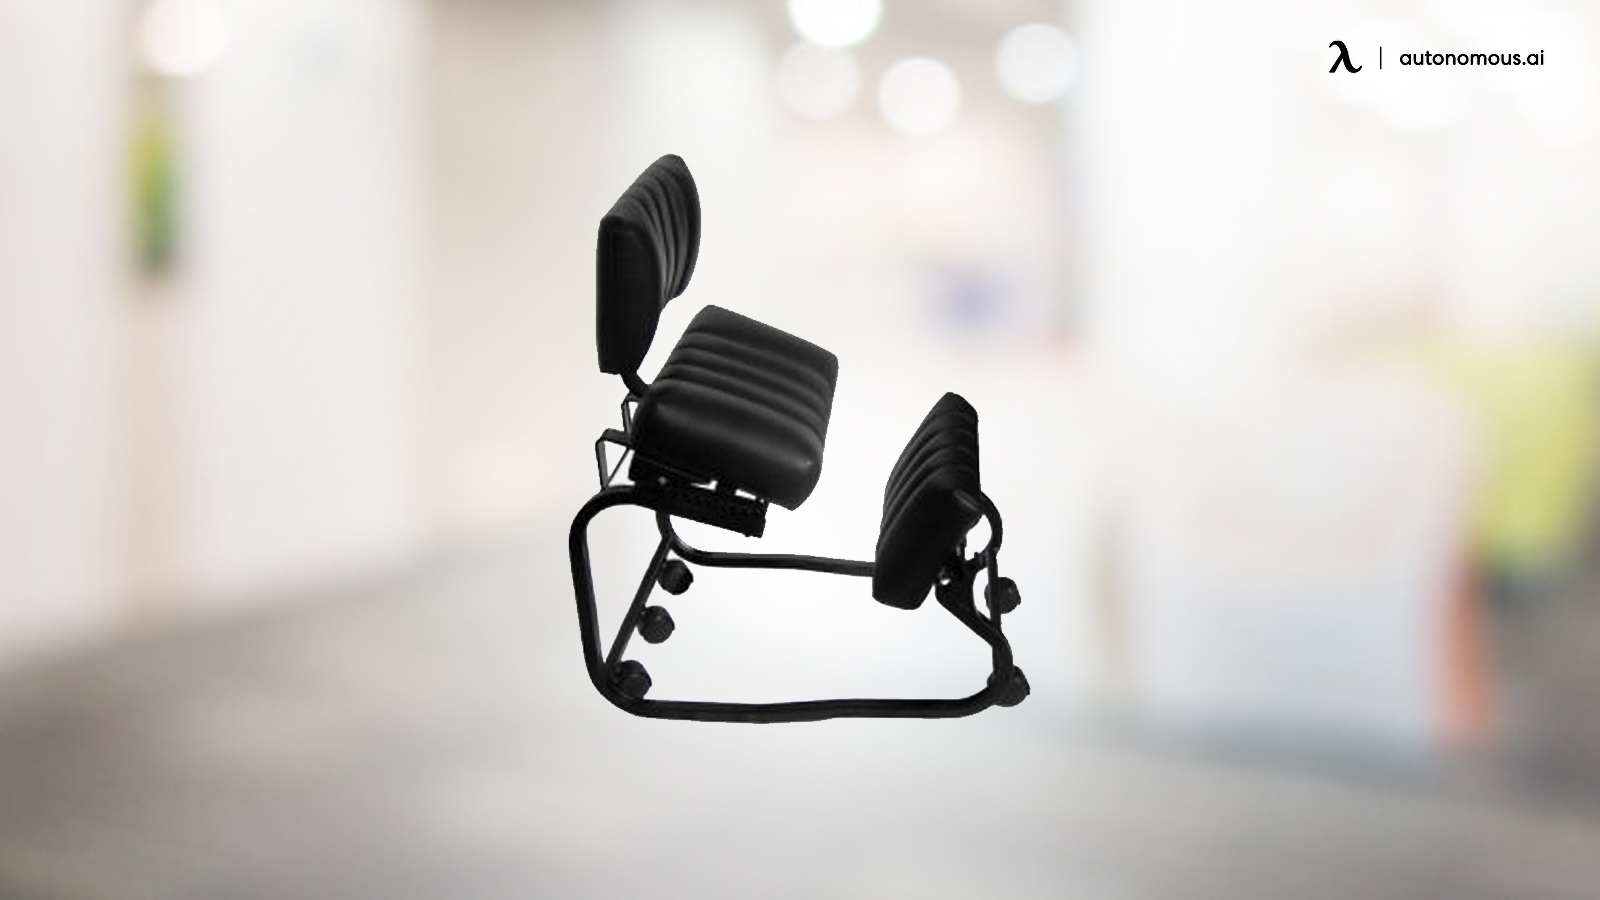 Kneeling Chair Review: The Pros and Cons and Are They Worth It?